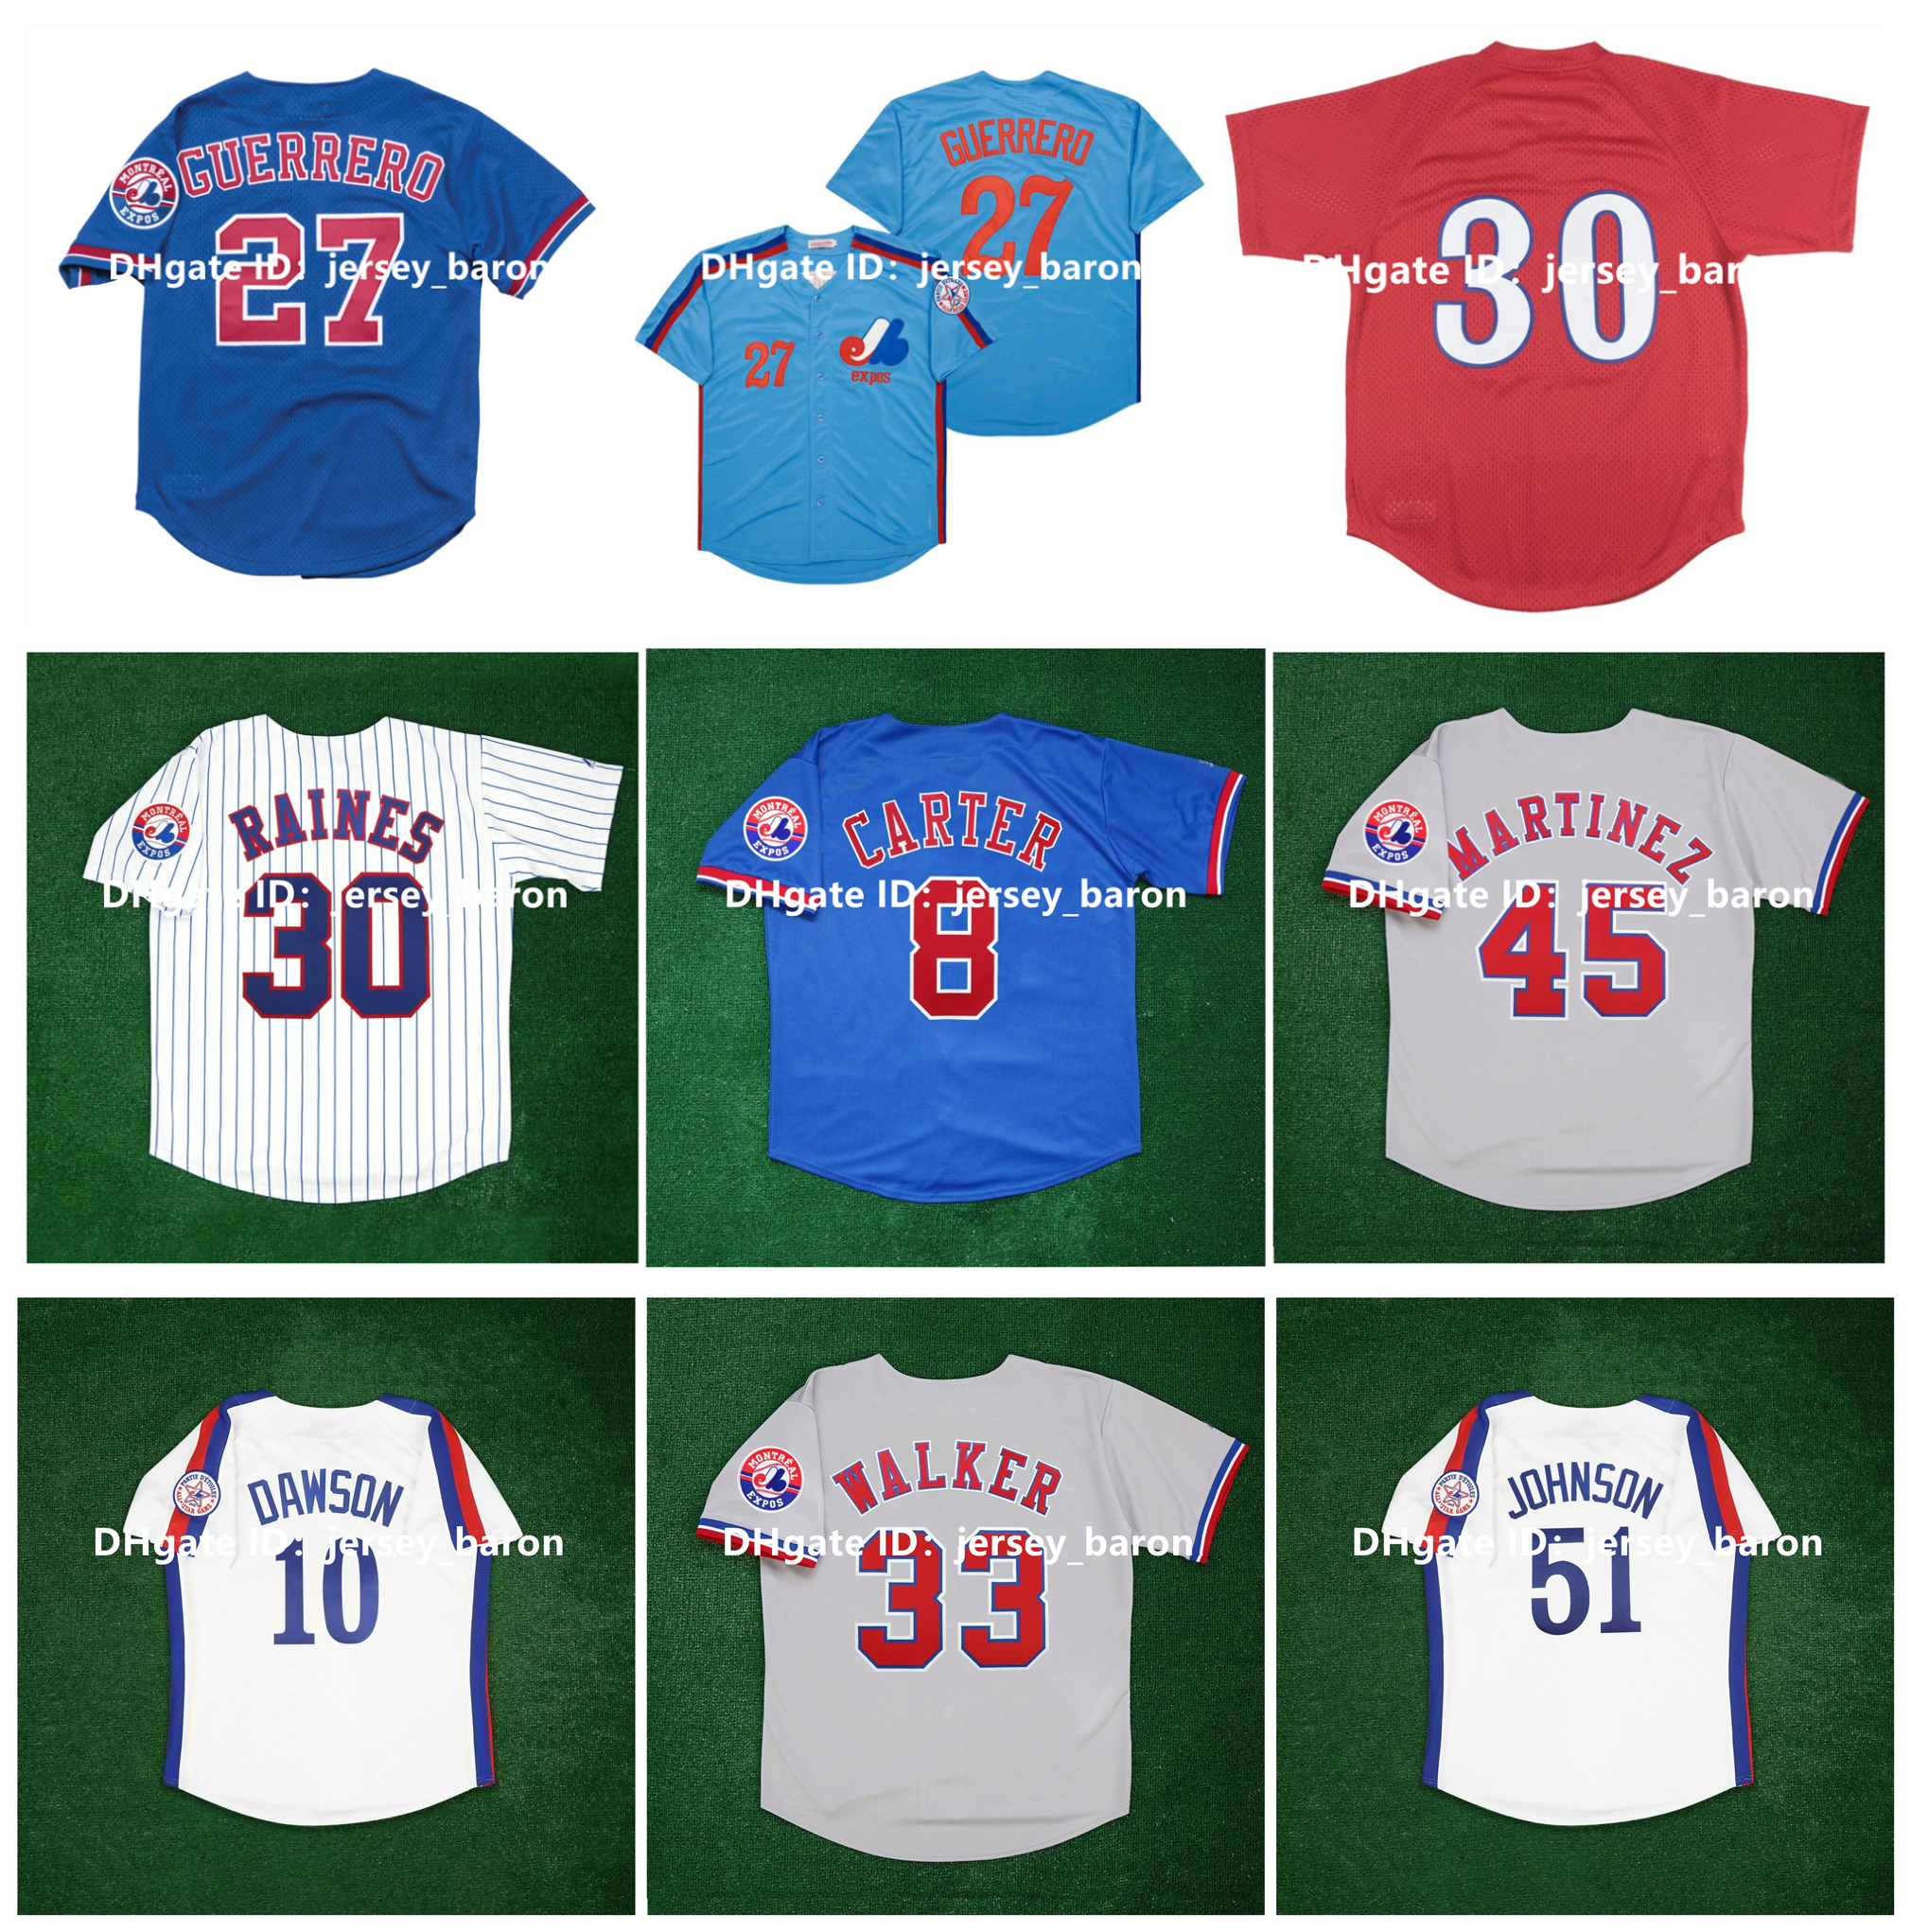 NEWCollege Baseball Wears Vintage Montreal Expos Baseball Jersey VLADIMIR GUERRERO GARY CARTER CLIFF FLOYD JOSE CANSECO PEDRO MARTINEZ TIM R